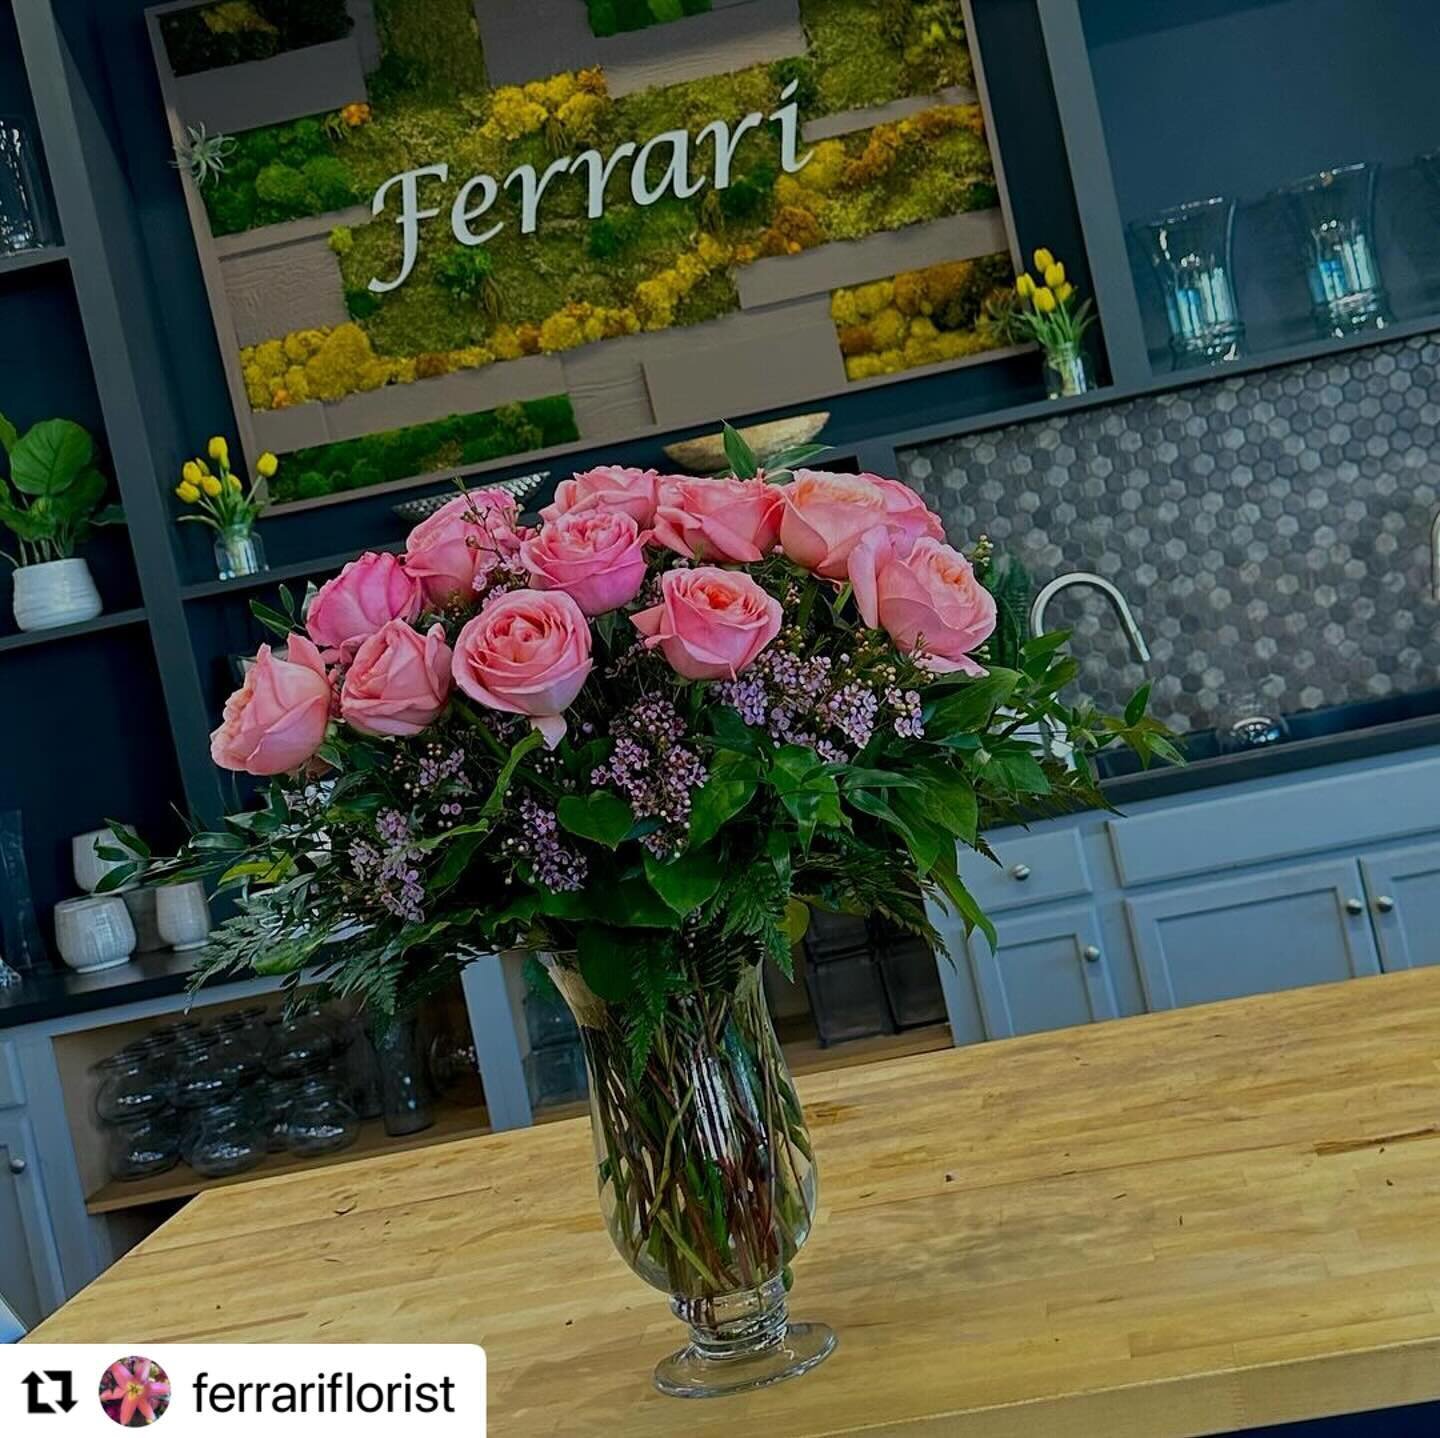 #Repost @ferrariflorist
・・・
We now carry premium garden roses &mdash;these fragrant beauties are long stem, large head roses that look and smell like peonies but last three times as long!
#flowersofinstagramlowerphotography #houseplantsofinstagram#ba